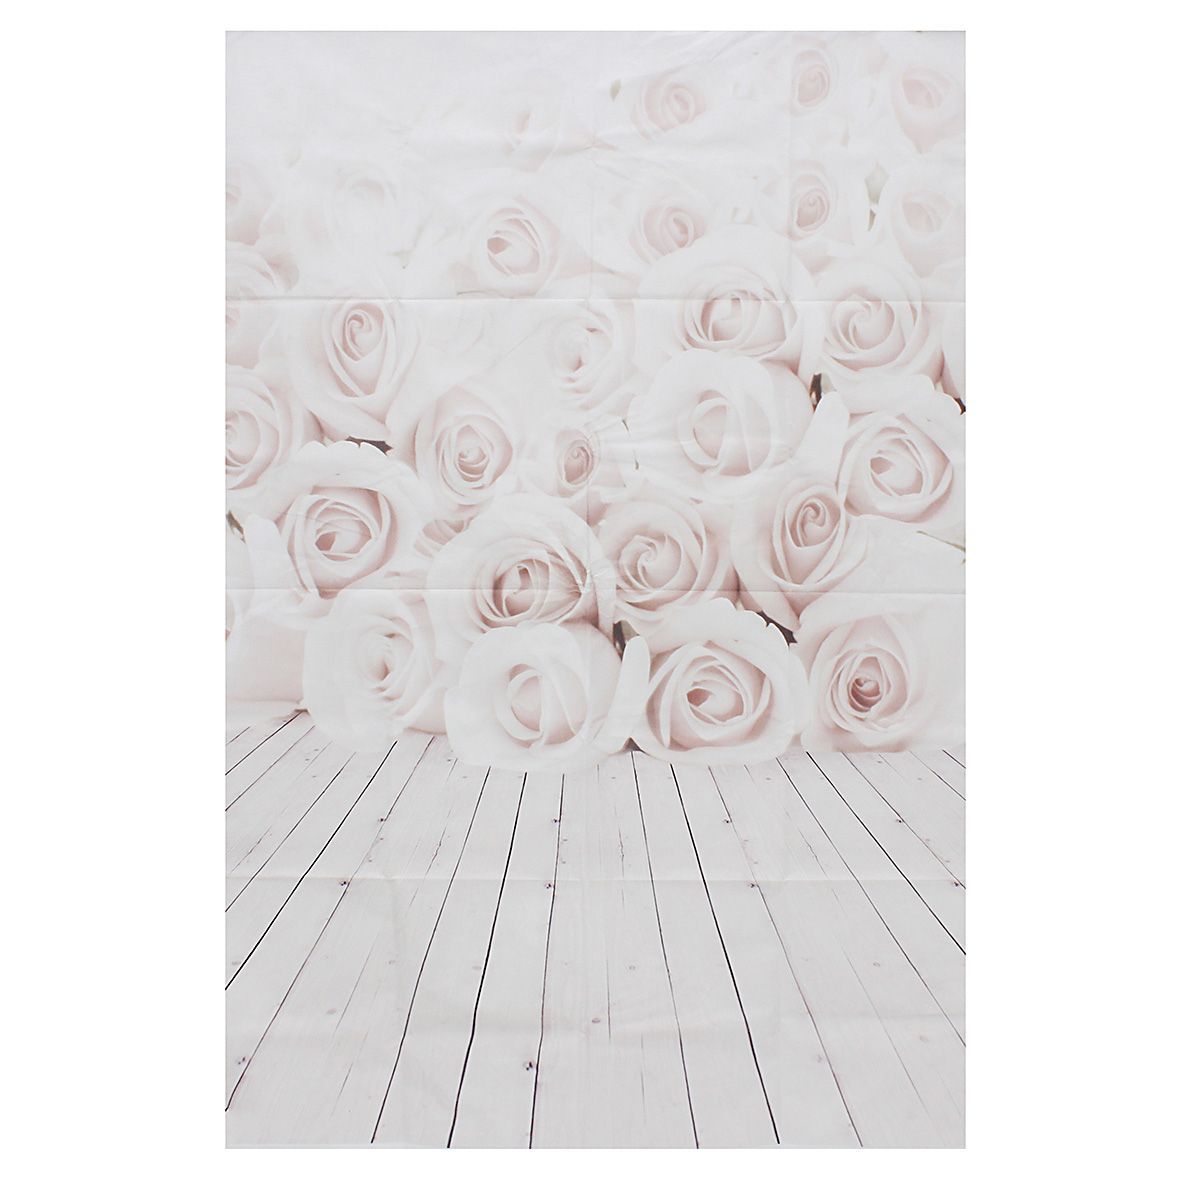 3x5ft-Valentines-Day-White-Roses-Love-Vinyl-Backgrounds-Props-Photography-Backdrops-1208198